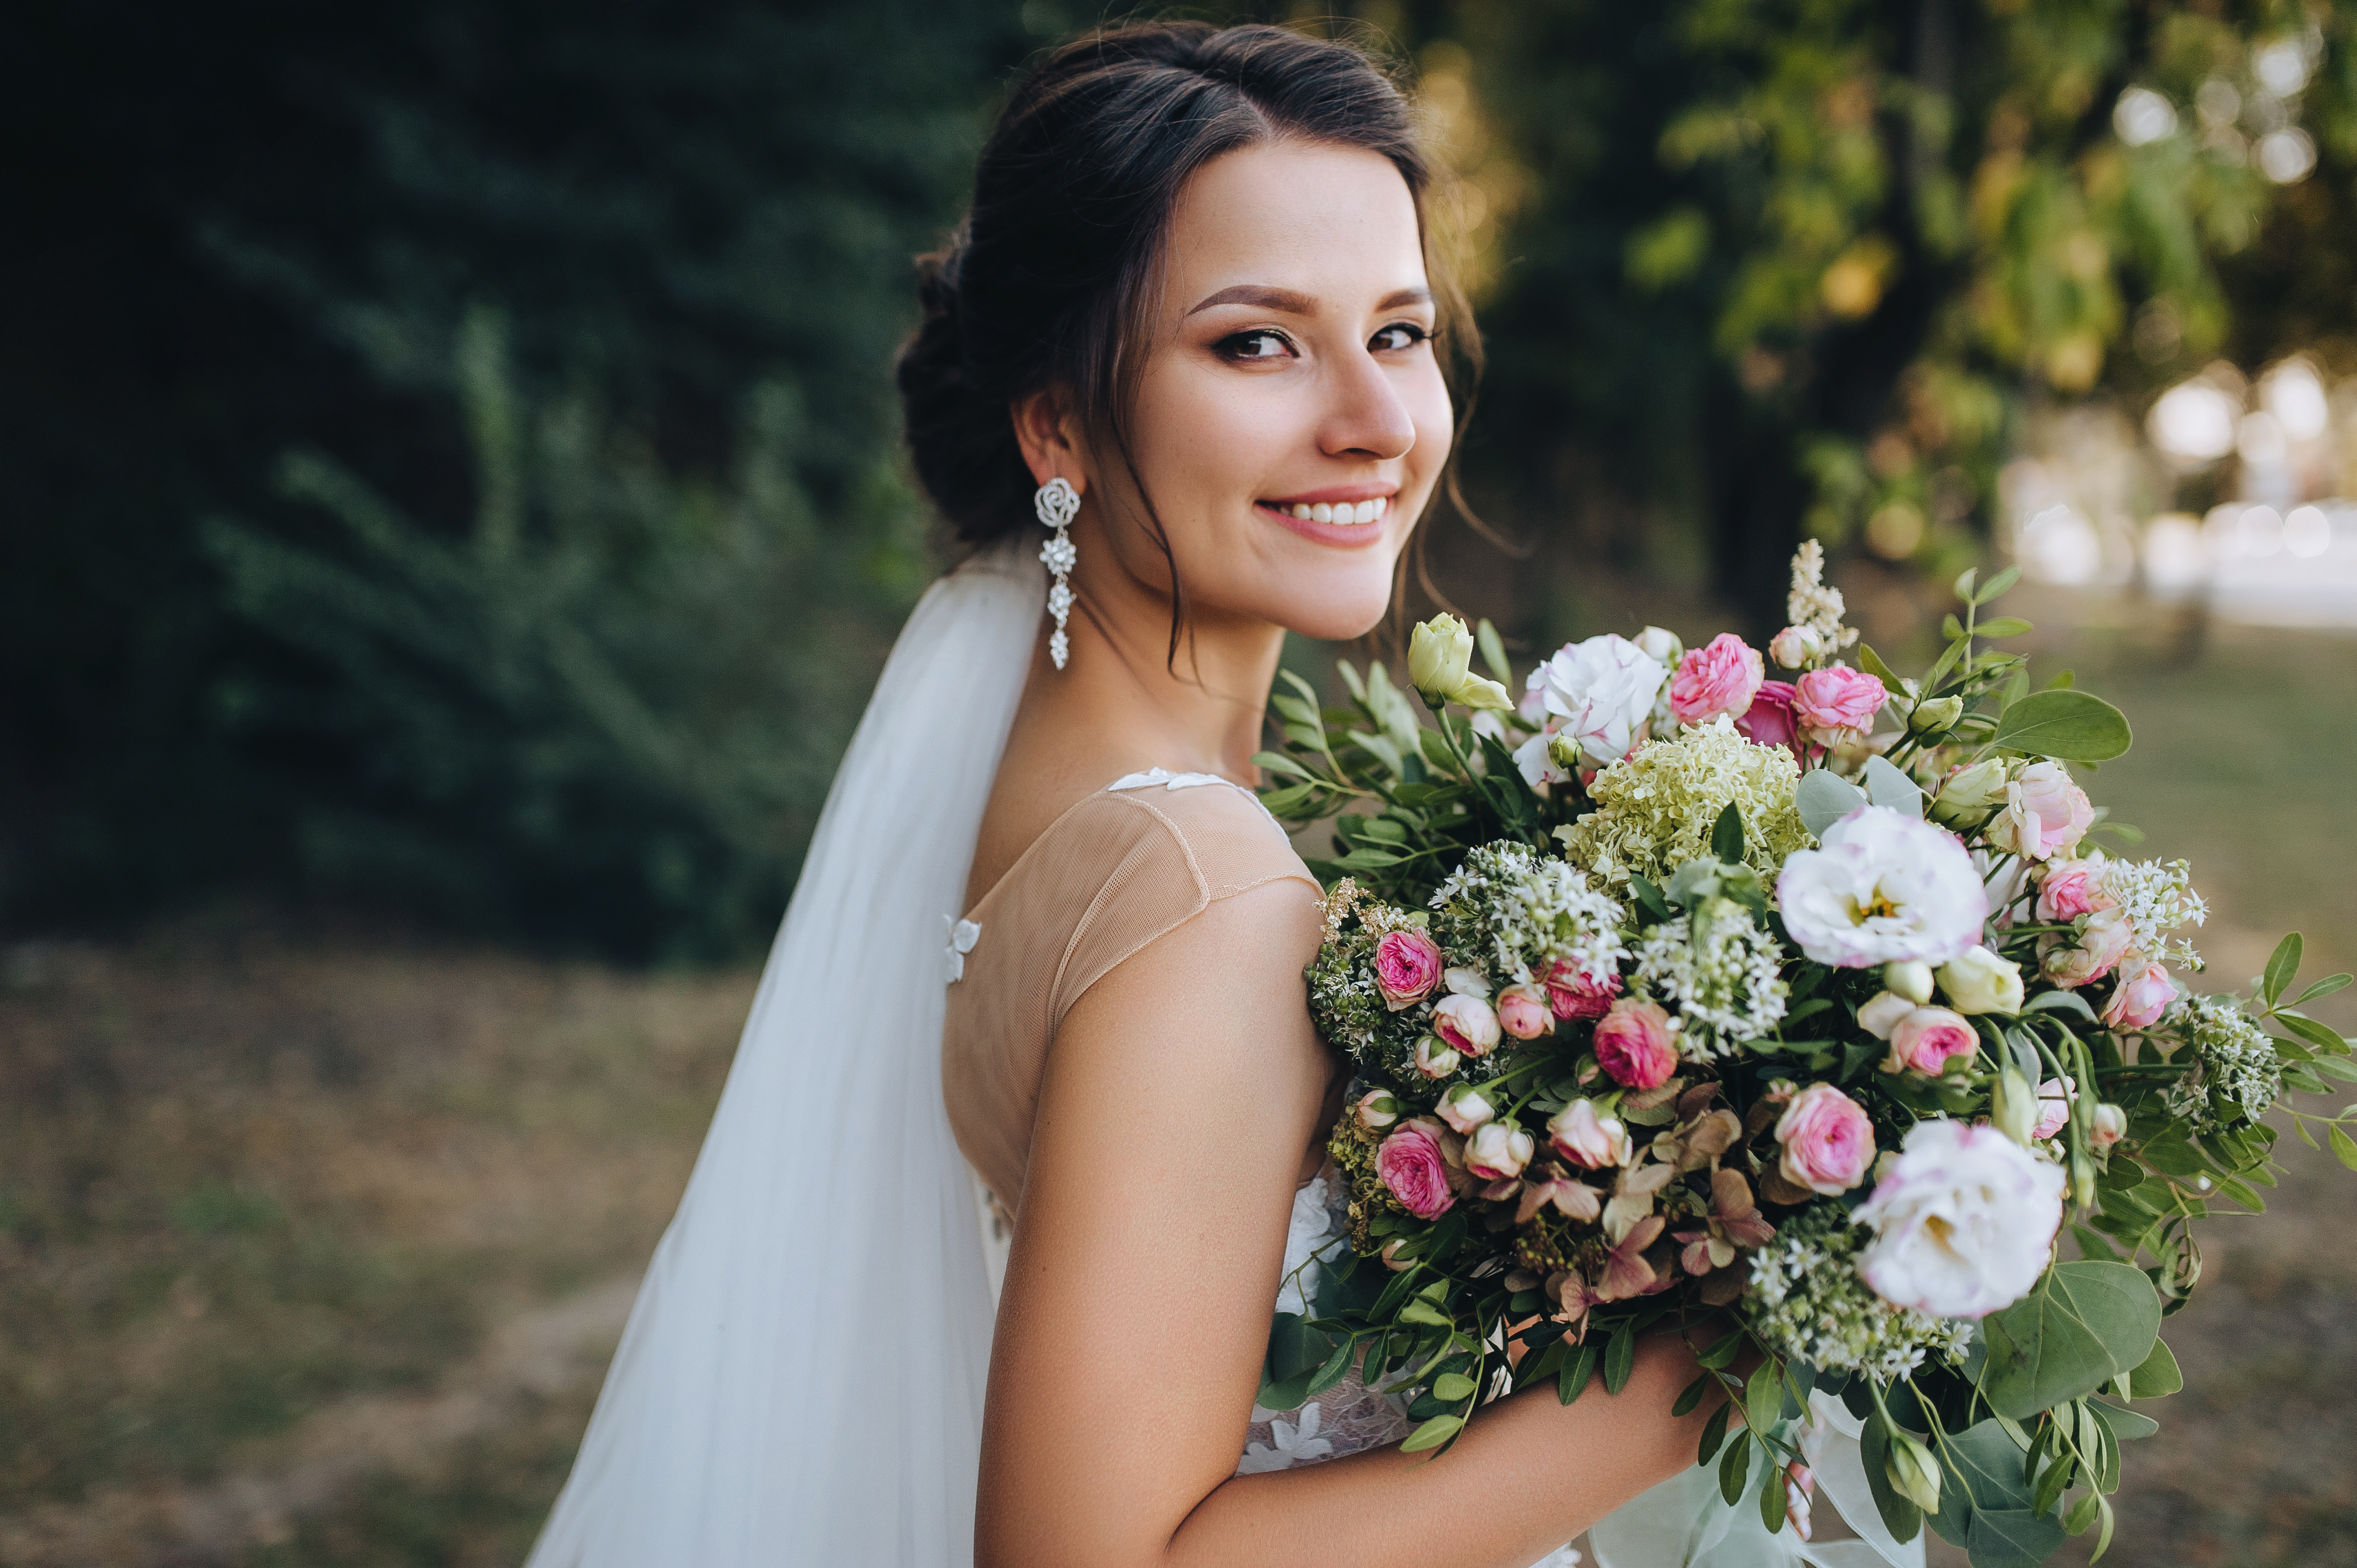 A beautiful bride stands on nature in greenery with a large bouquet. Wedding portrait close-up of the young bride. Wedding photography.